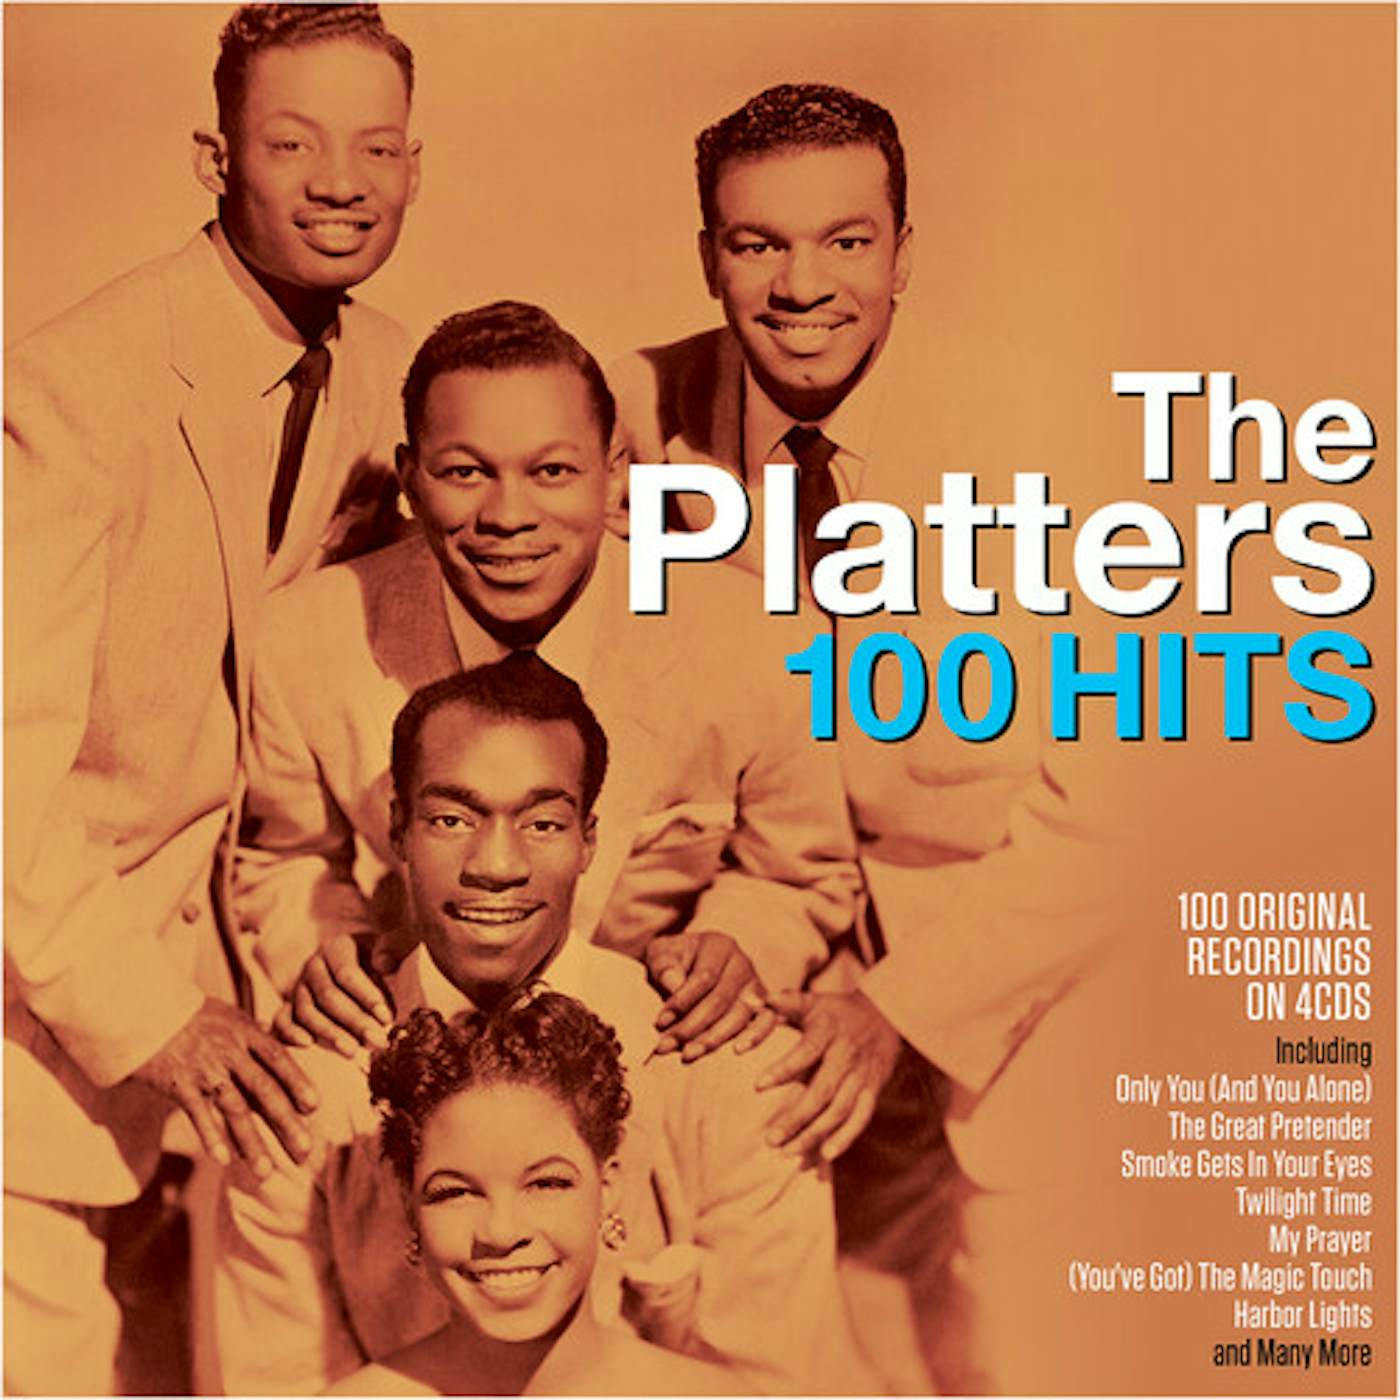 The Platters 100 HITS CD